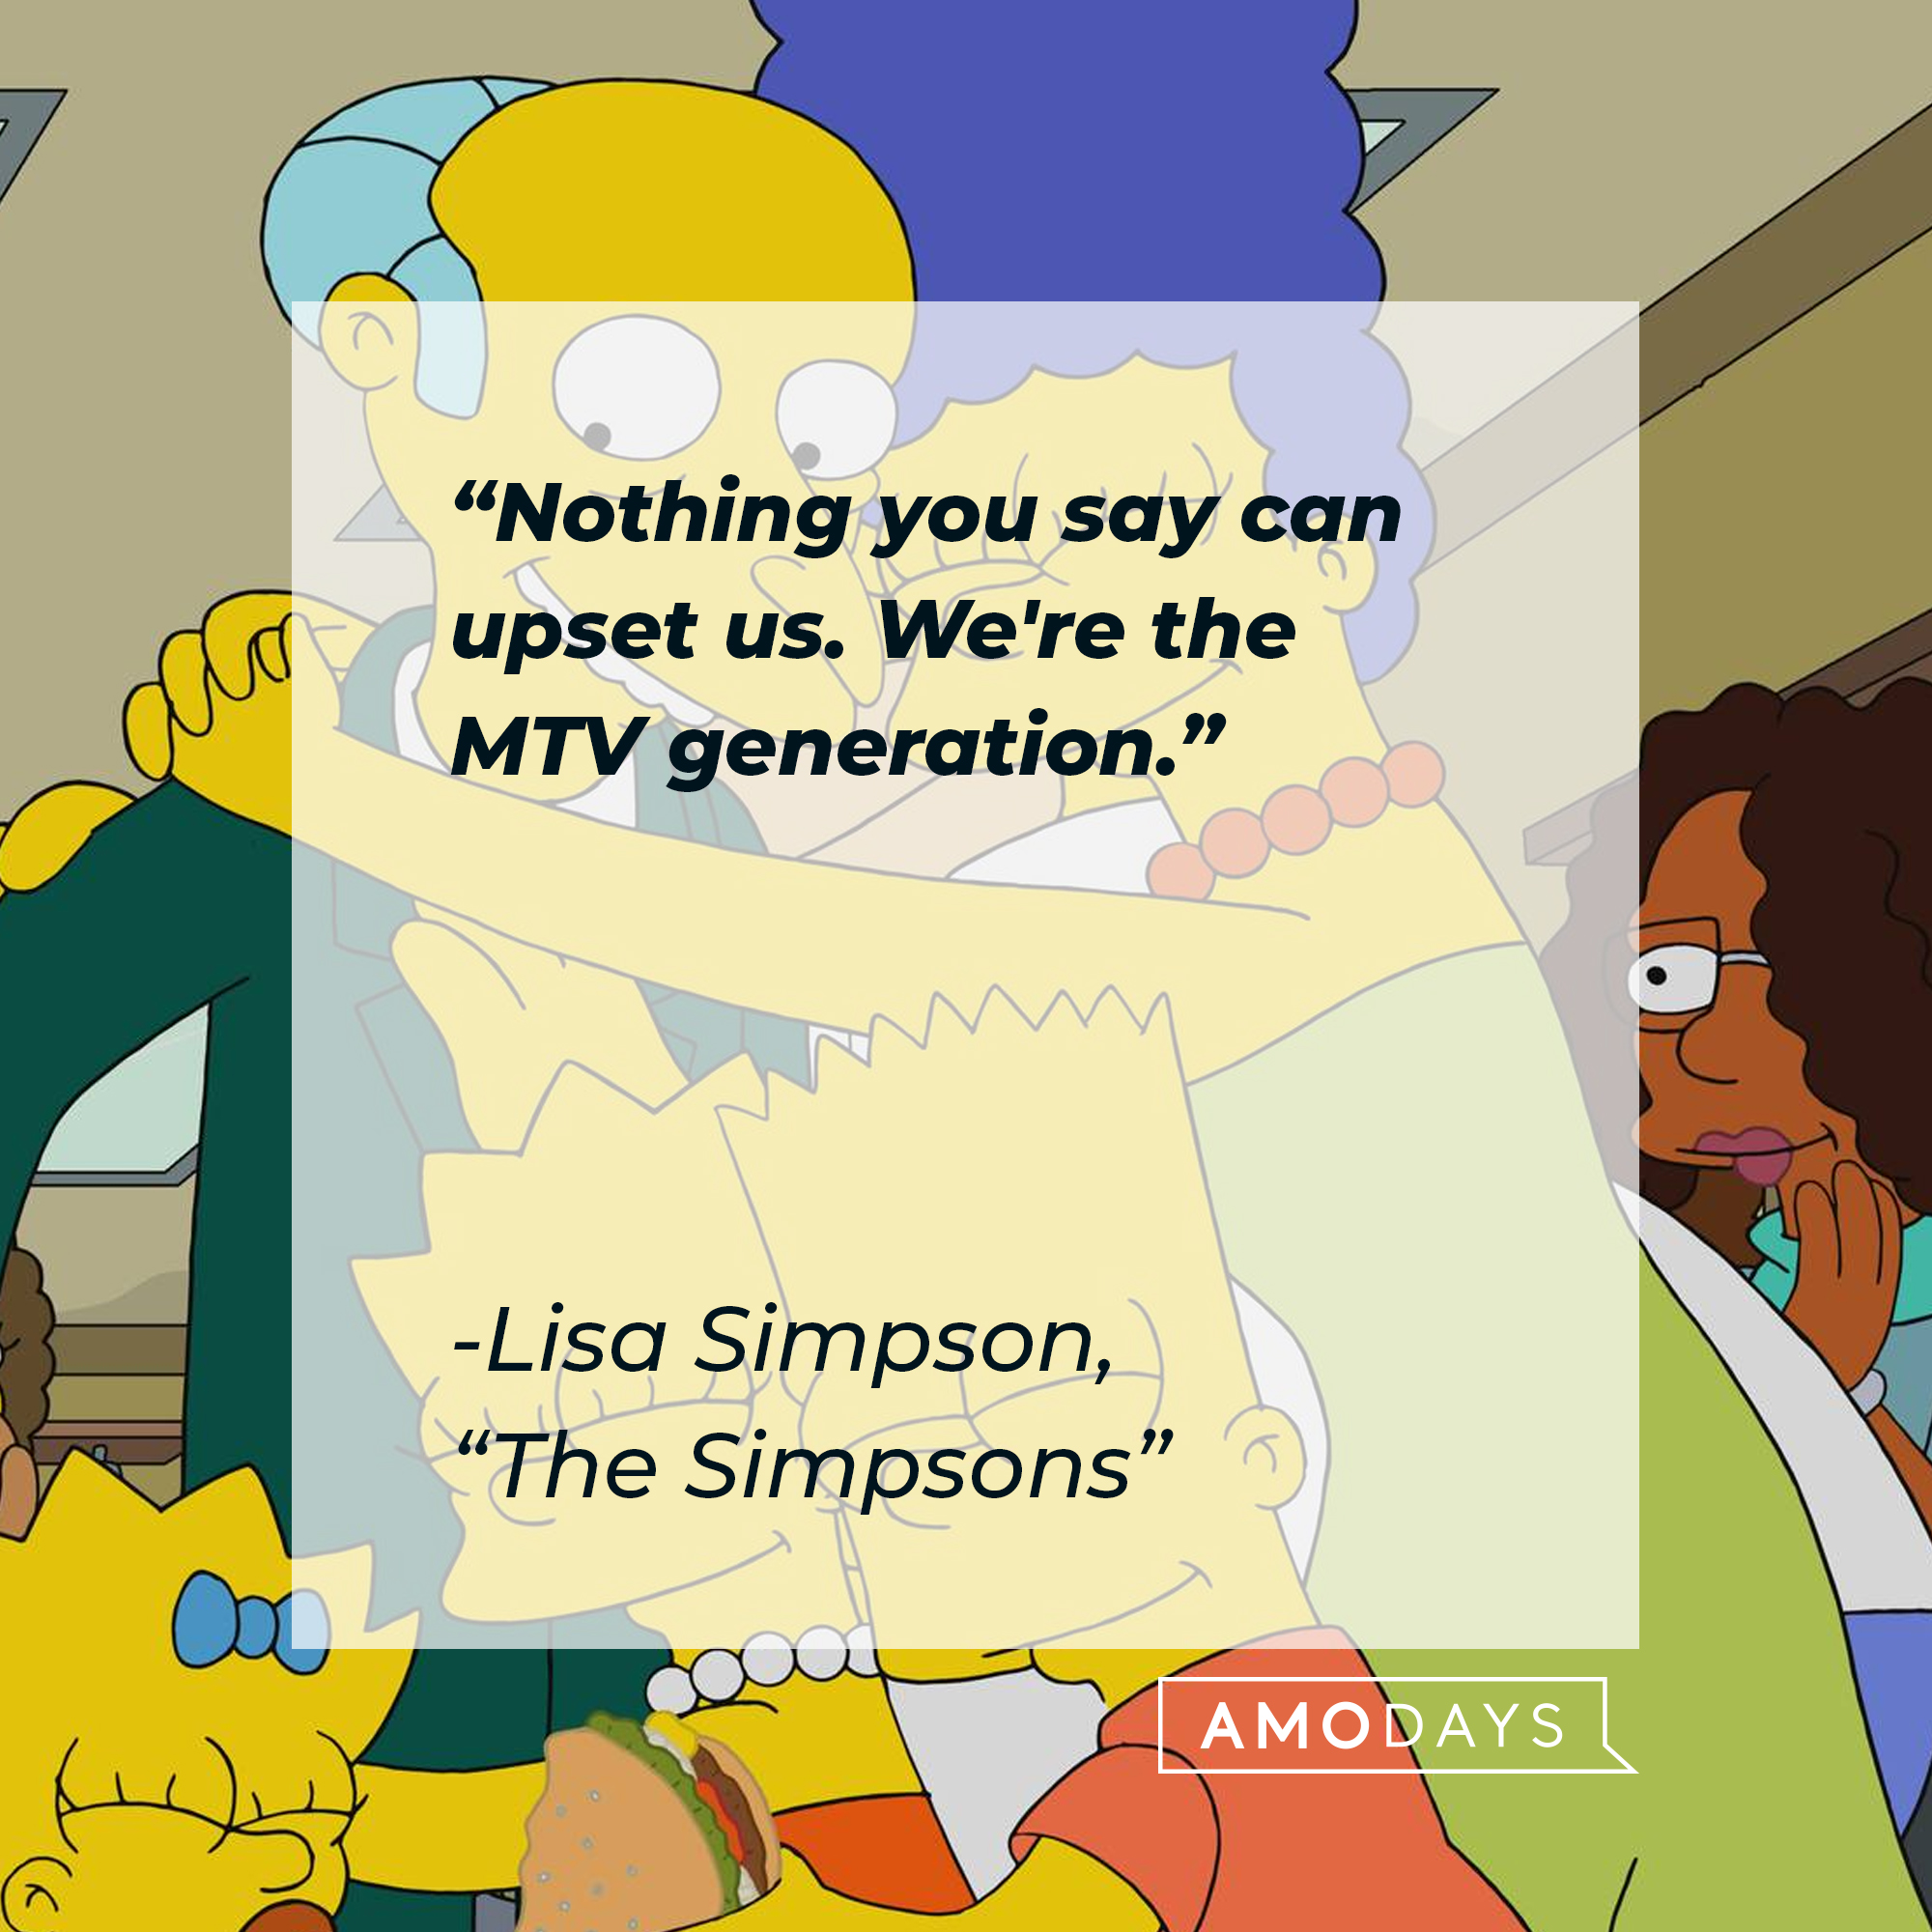 Lisa Simpson with her quote: "Nothing you say can upset us. We're the MTV generation." | Source: Facebook.com/TheSimpsons